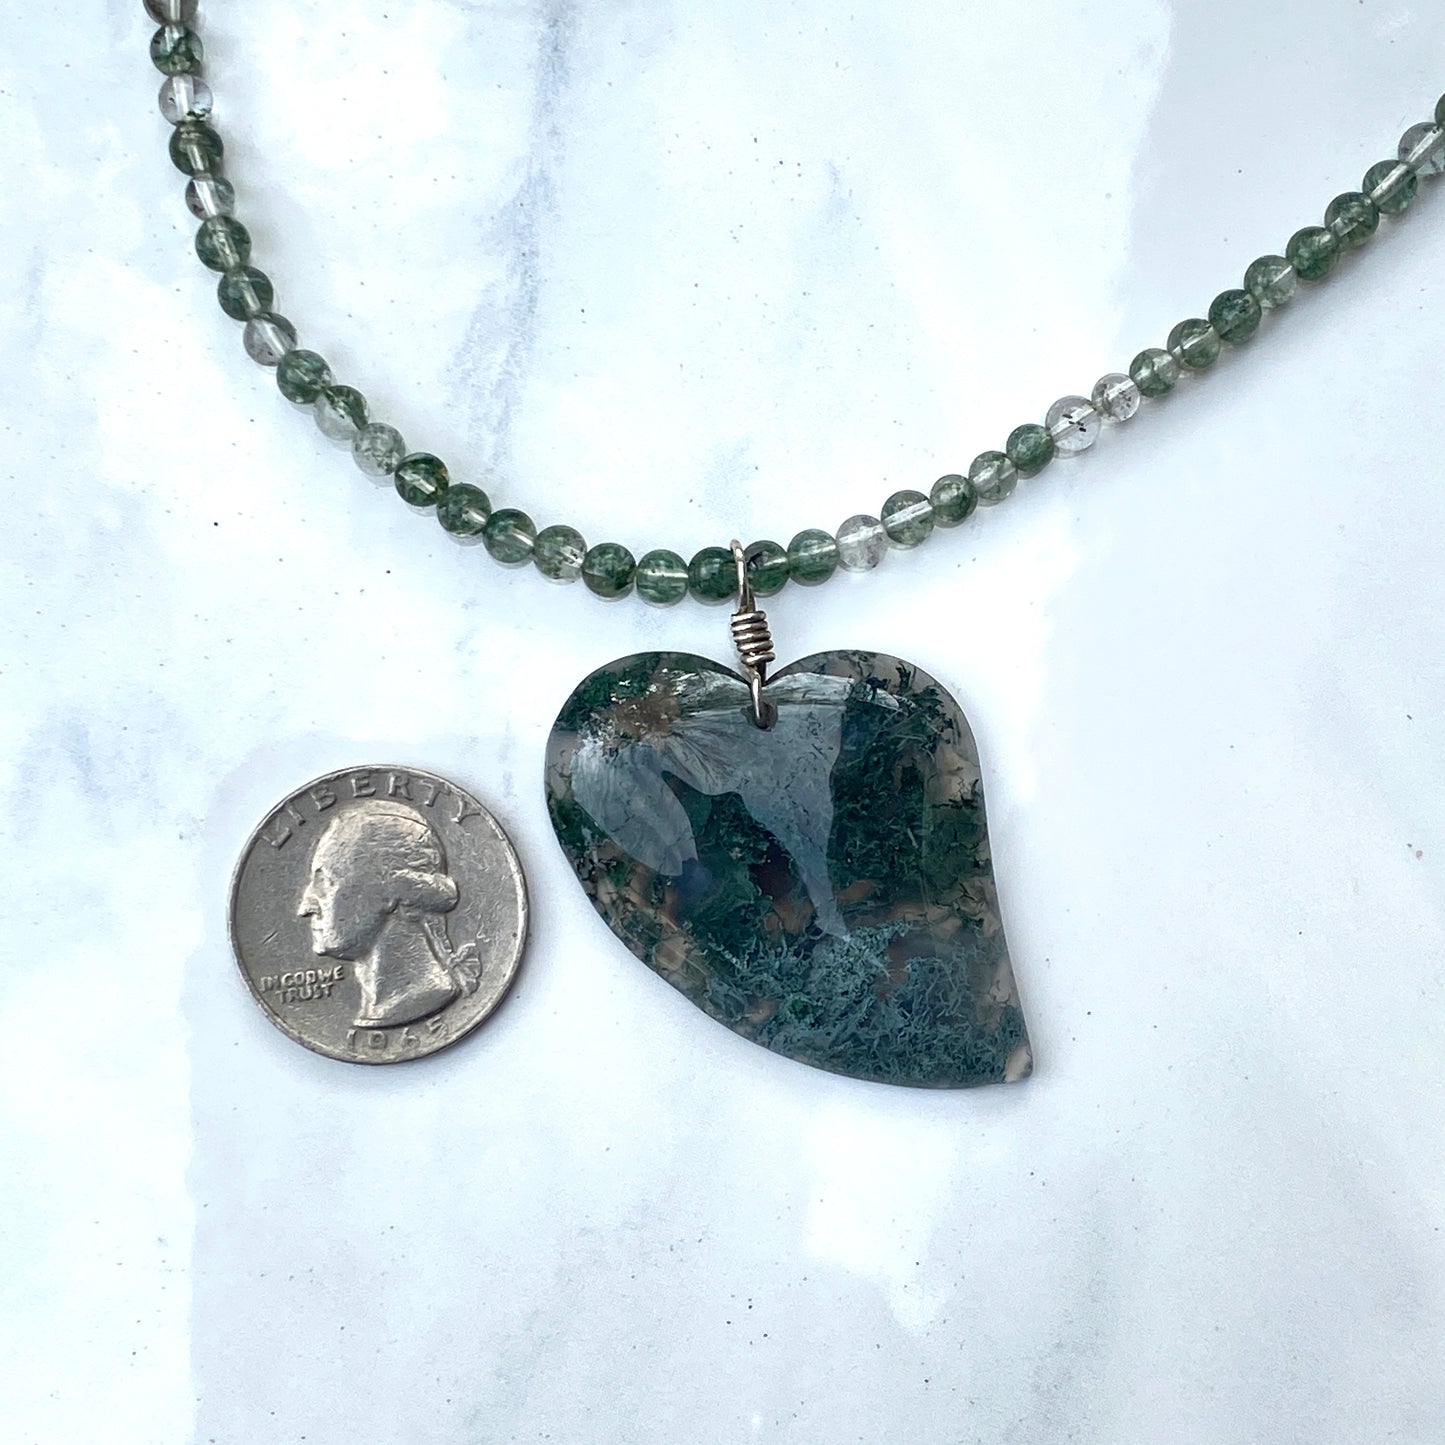 Green Moss Agate Gemstone Heart on Beaded 4mm Green Moss Agate Necklace w/ Sterling Silver Clasp